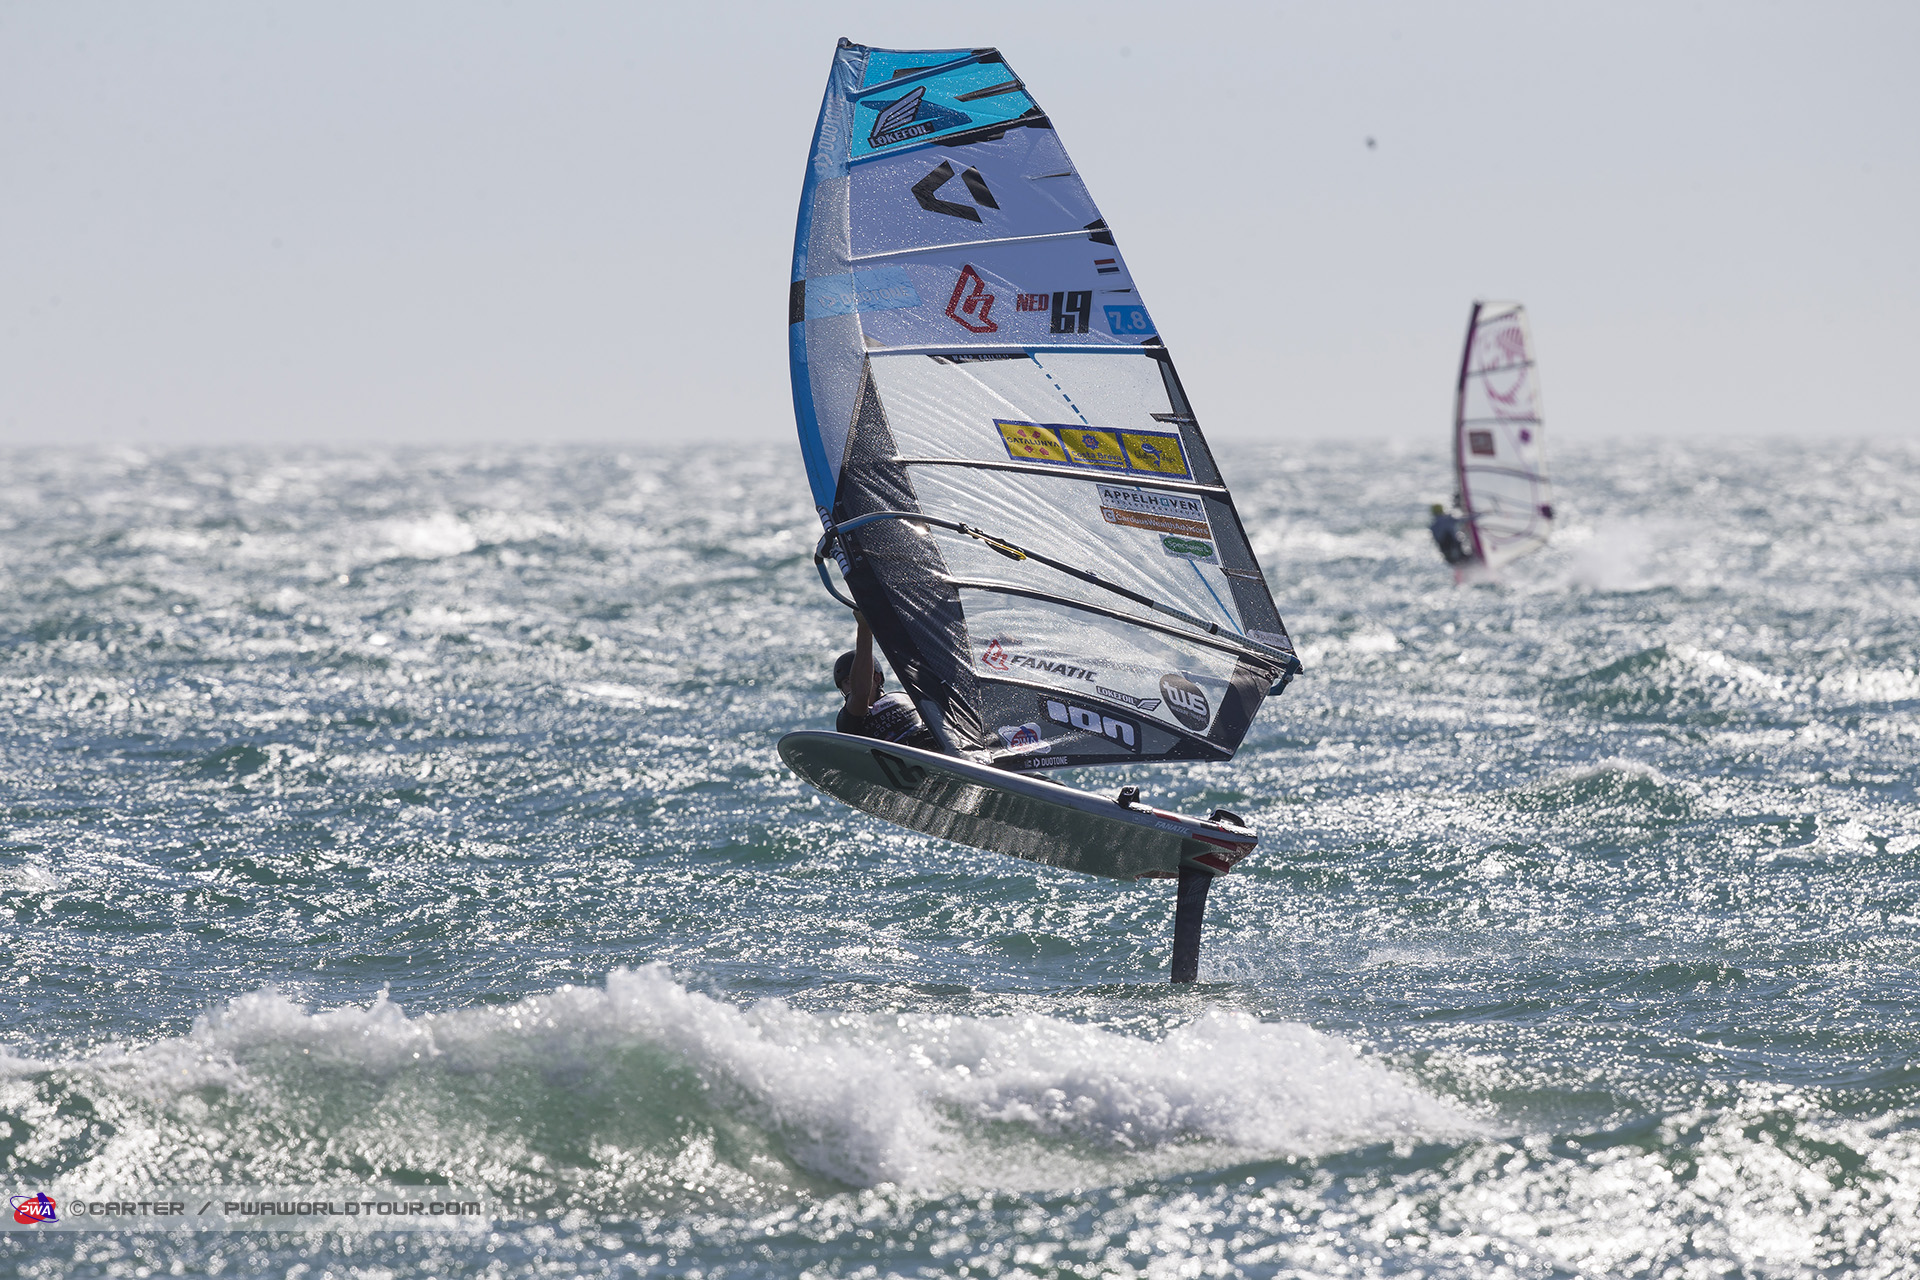  Windsurfing  PWA World Tour 2019  Windfoil Men  Roses ESP  Day 2, big breeze day with RS:X cracks in arrears